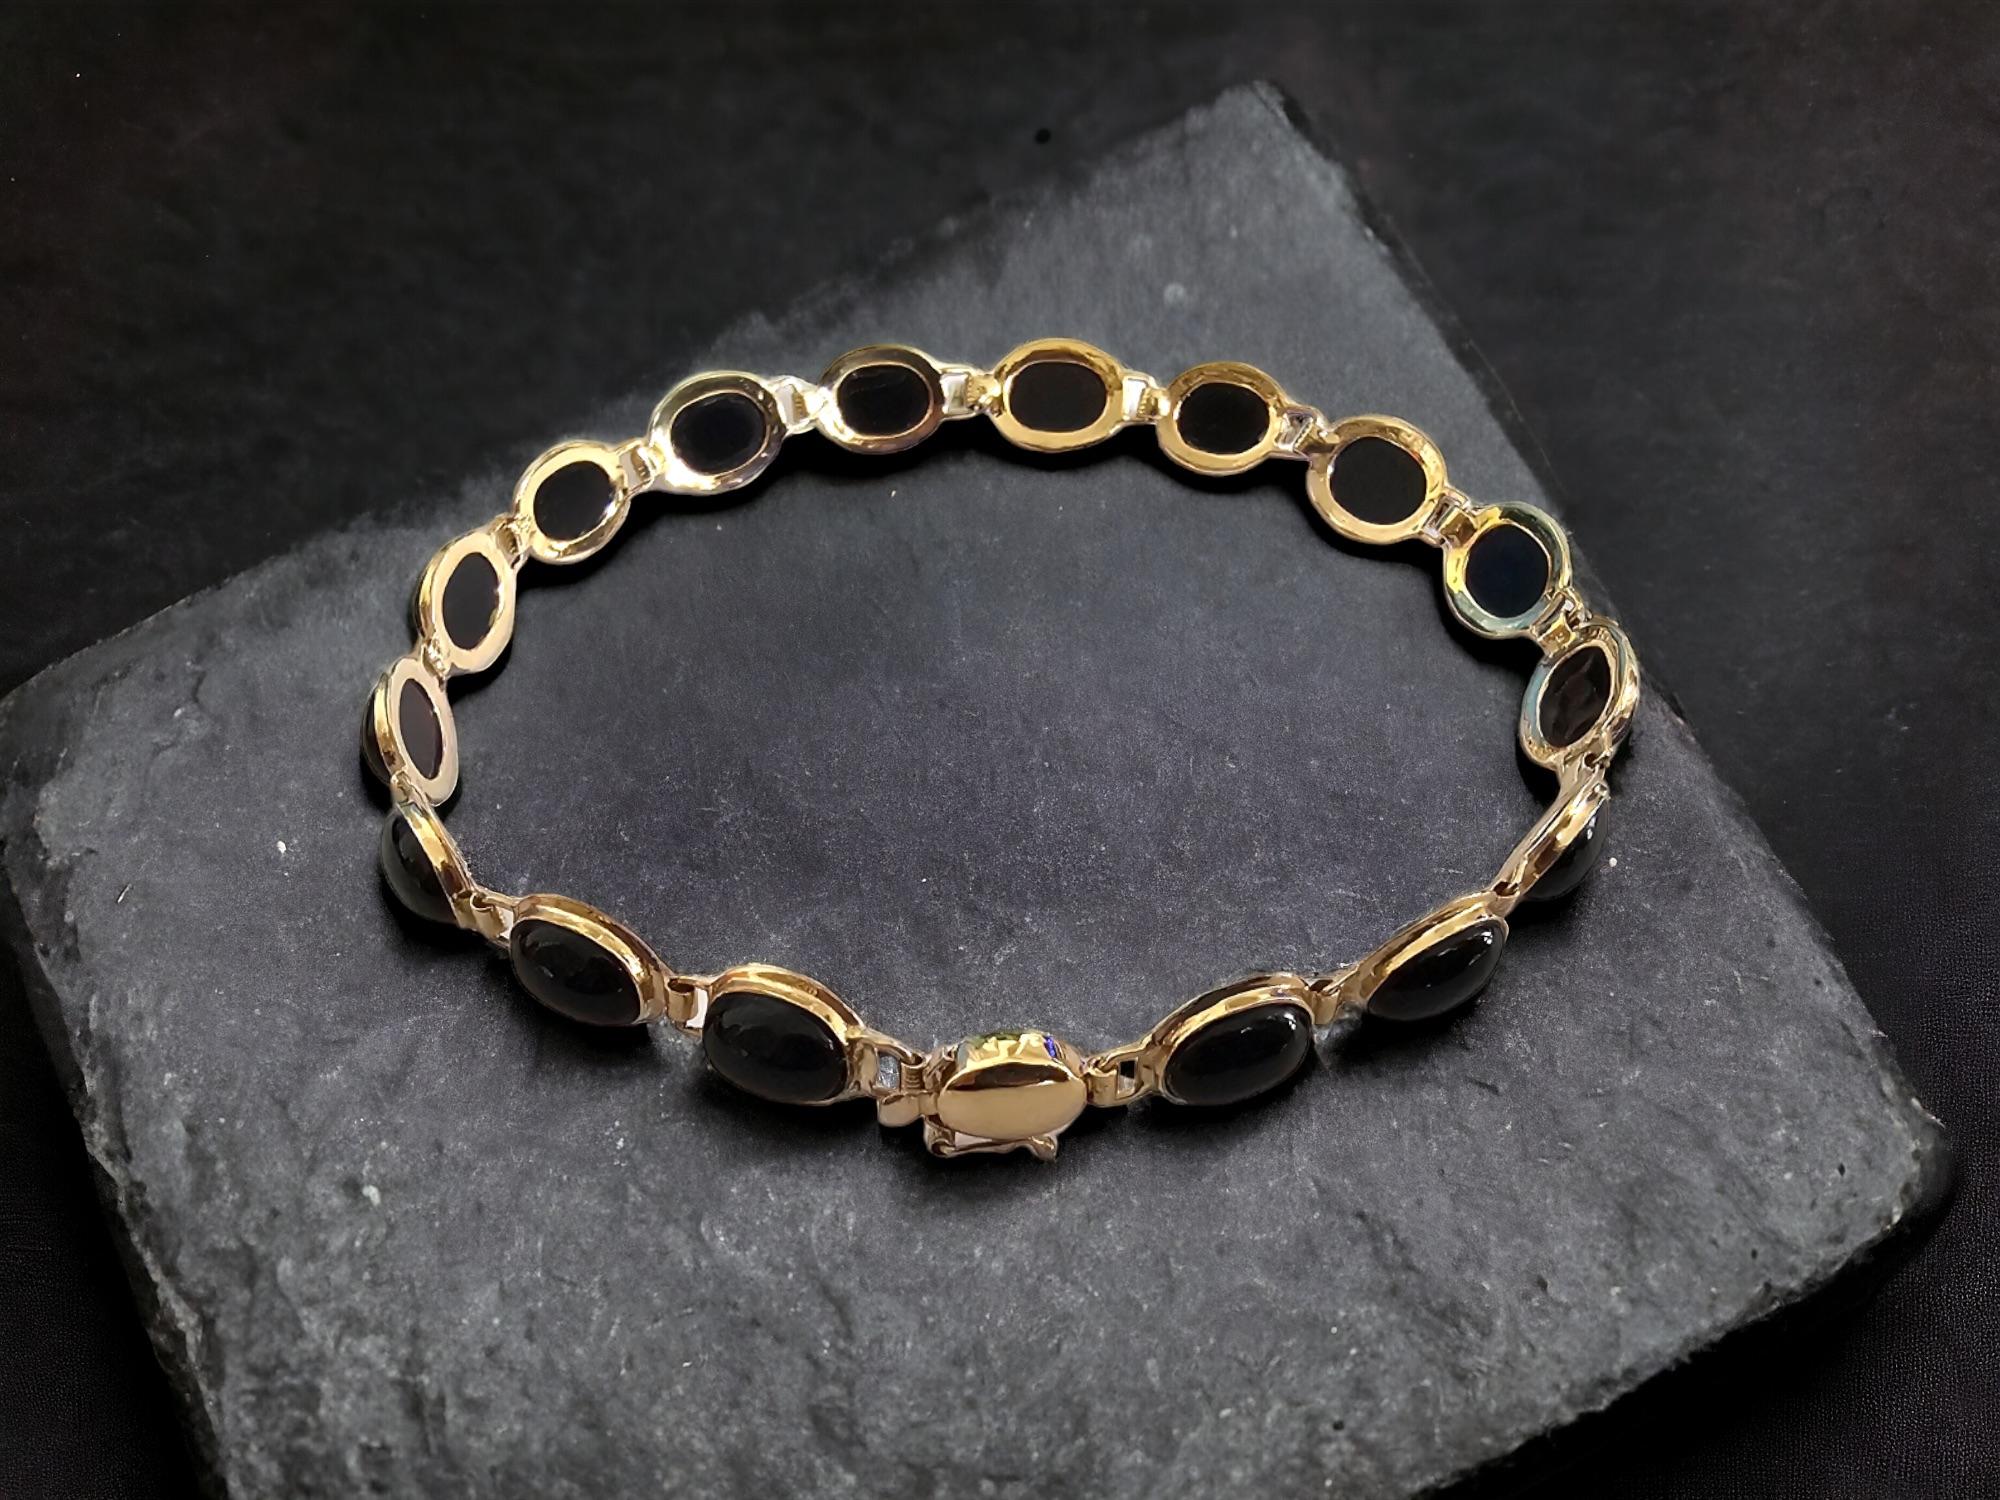 Tibetan Black Onyx Beaded Bracelet (with 14K Solid Yellow Gold) For Sale 3